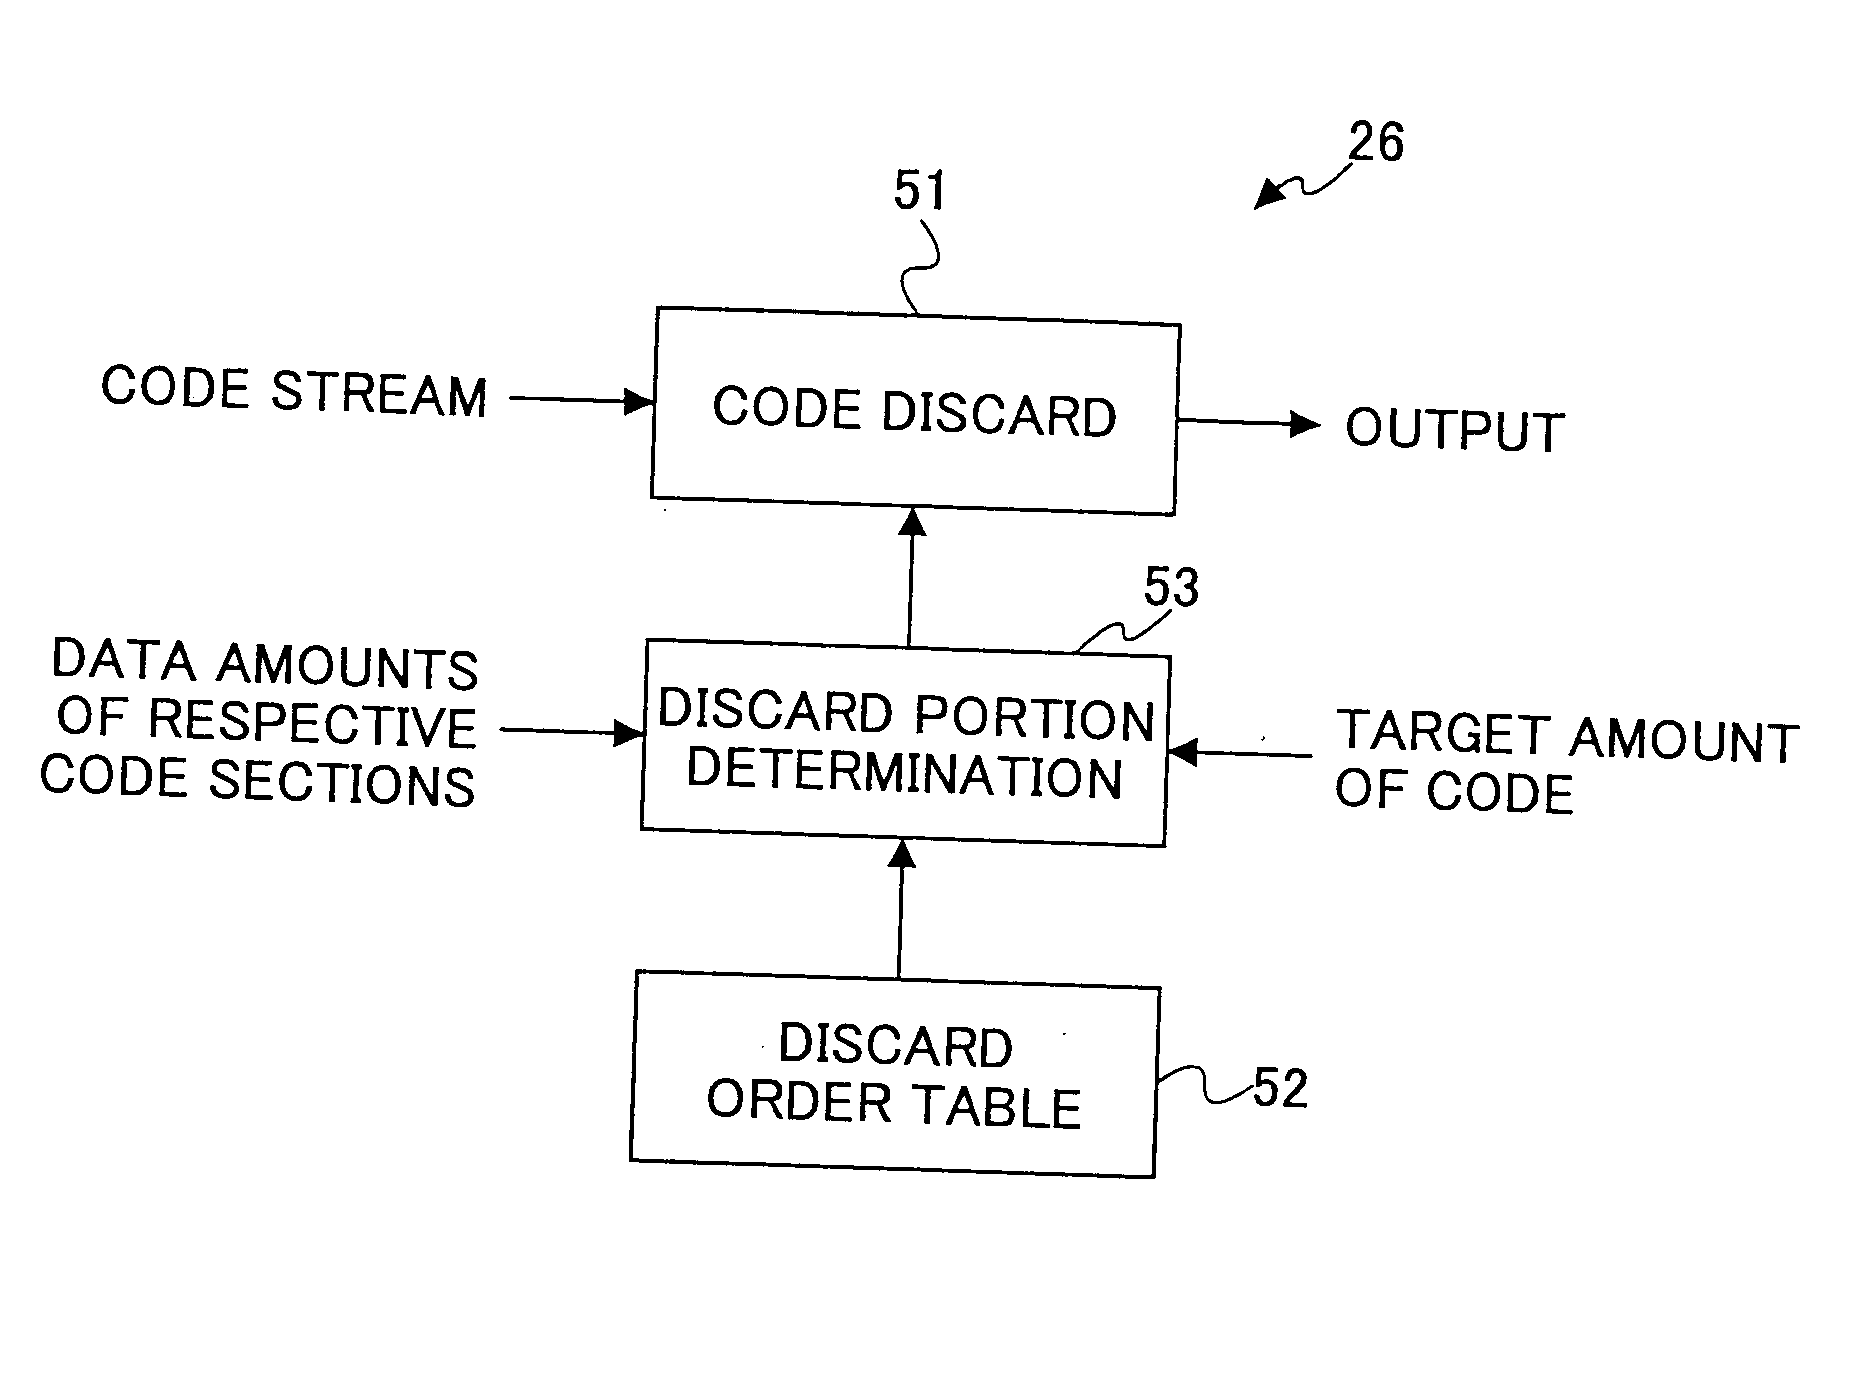 Image coder and image decoder capable of power-saving control in image compression and decompression